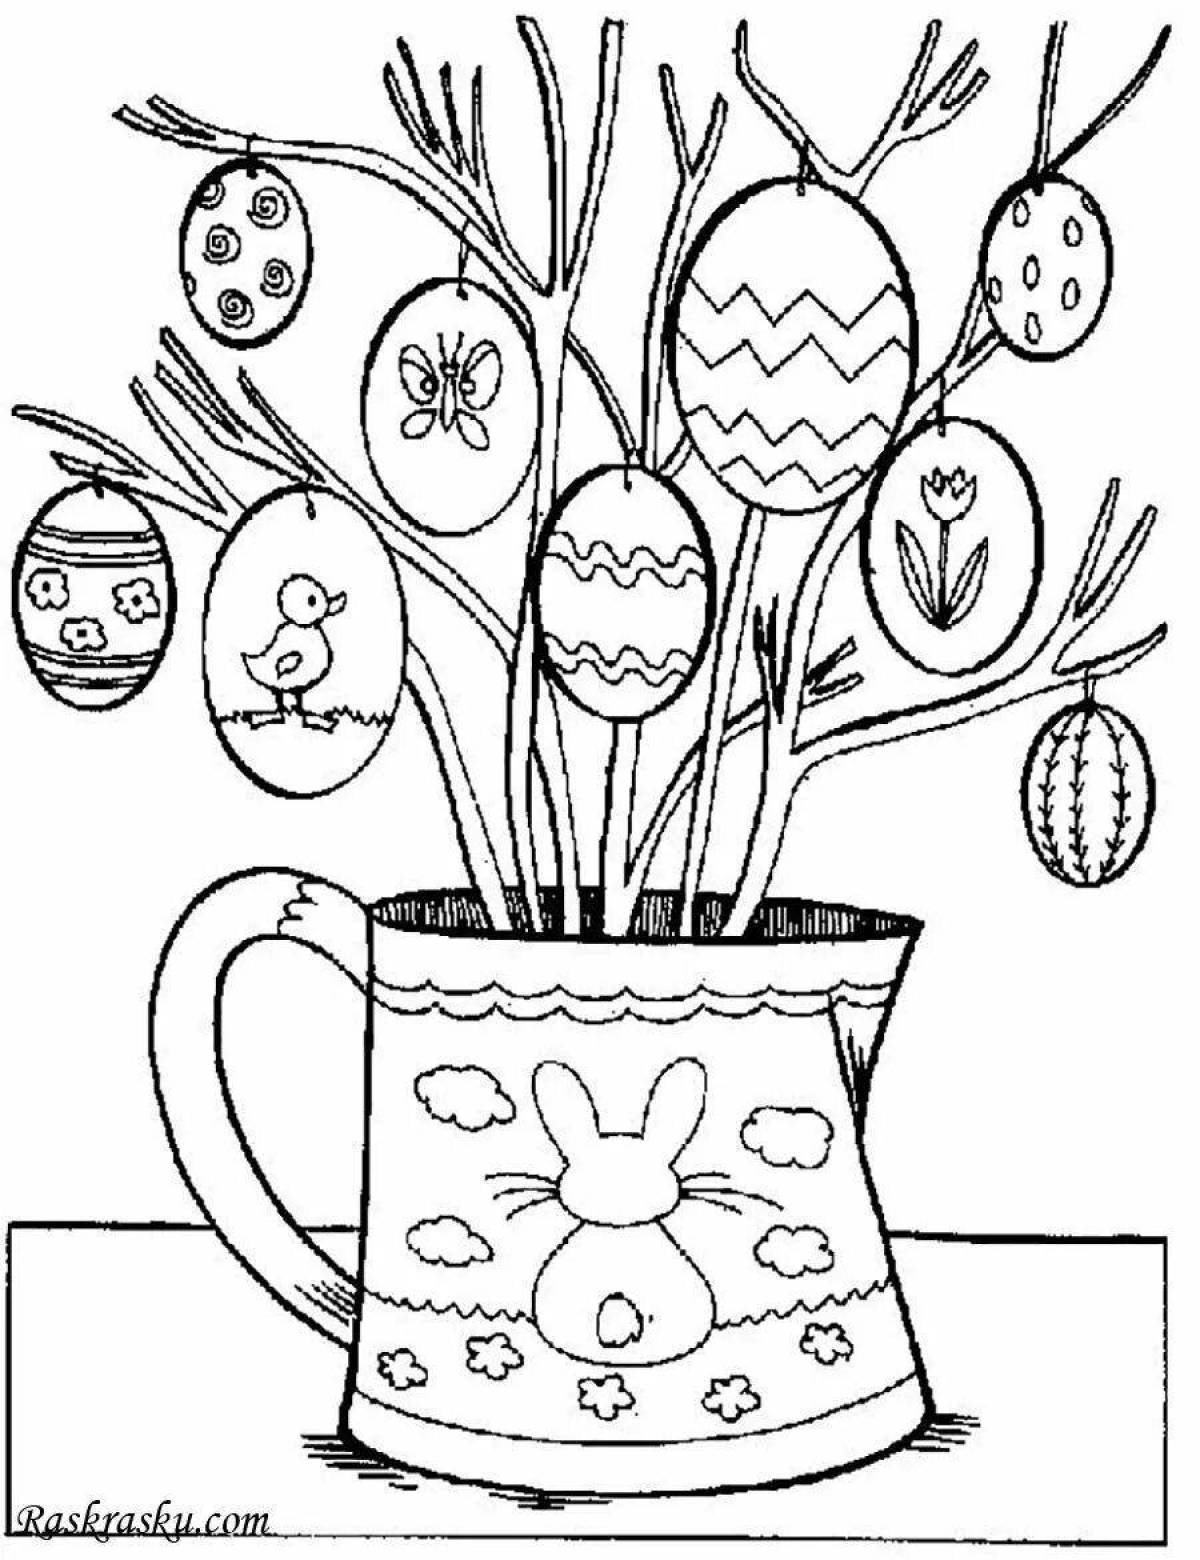 Adorable Easter symbols coloring book